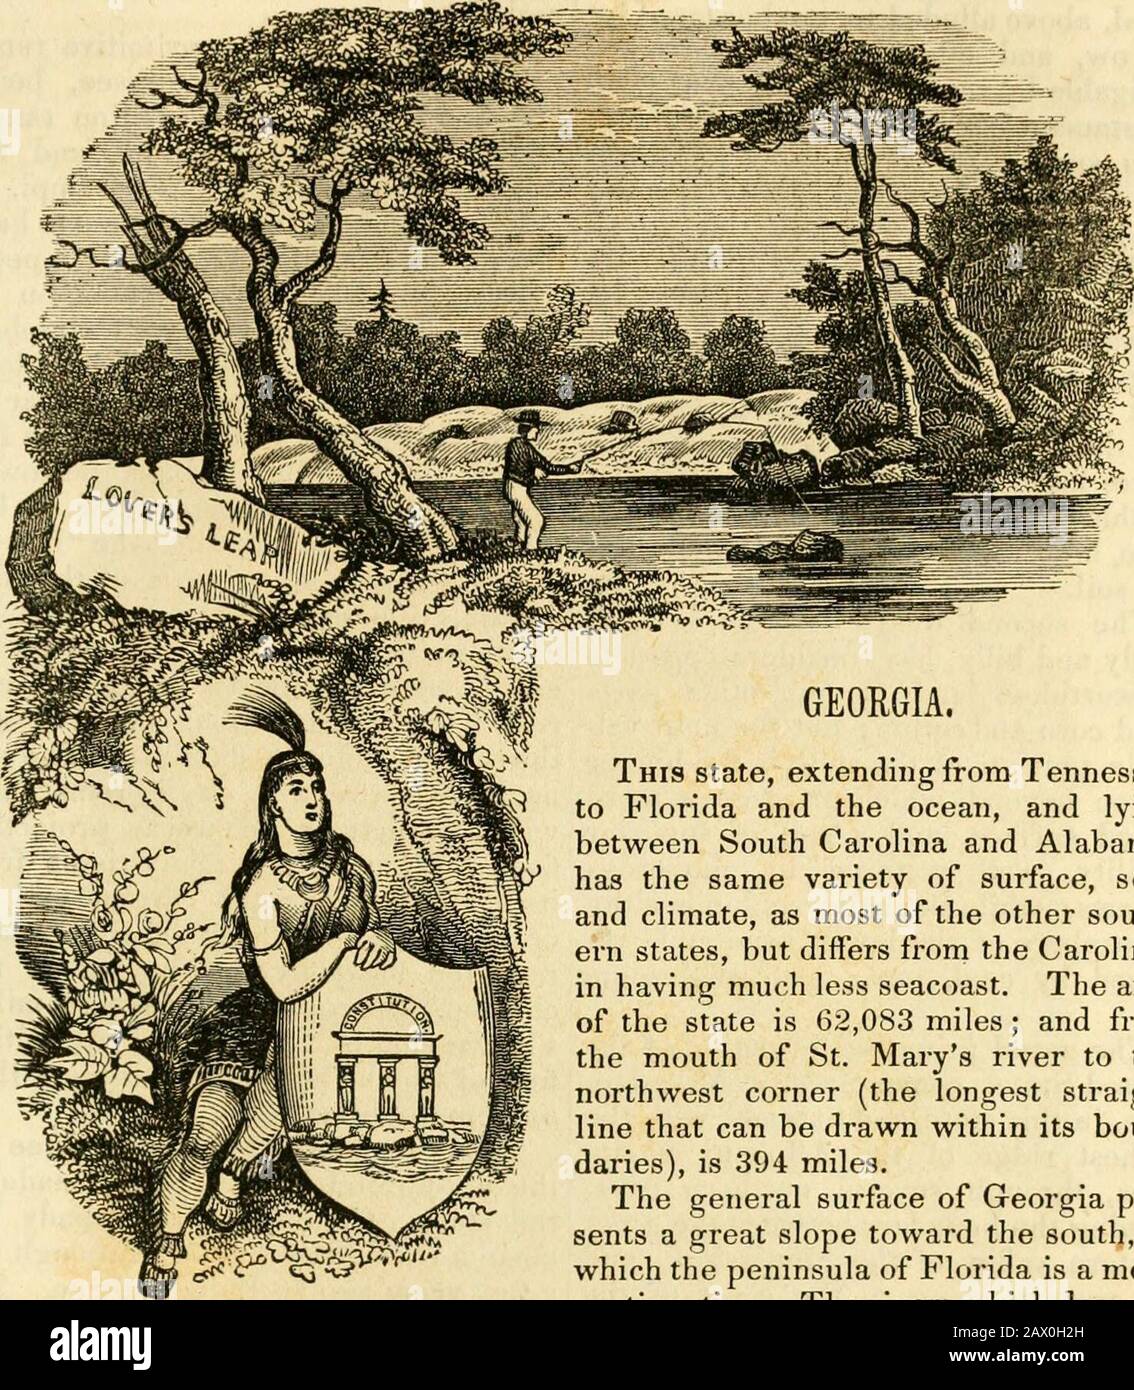 A pictorial description of the United States; embracing the history, geographical position, agricultural and mineral resources .. . etown, and stage-coaches daily toColumbia and Raleigh. Camden, 33 miles from Columbia,stands on a plain on the left bank of theWateree, and contains several fine pub-lic buildings; the city-hall, courthouse,masonic hall, bank, library, academy,and four churches. The Monument, in De Kalb street,was founded in 1825, when the corner-stone was laid by General Lafayette, inhonor of Baron De Kalb. The Indianmound, a few miles west of the town,is said to be one of the re Stock Photo